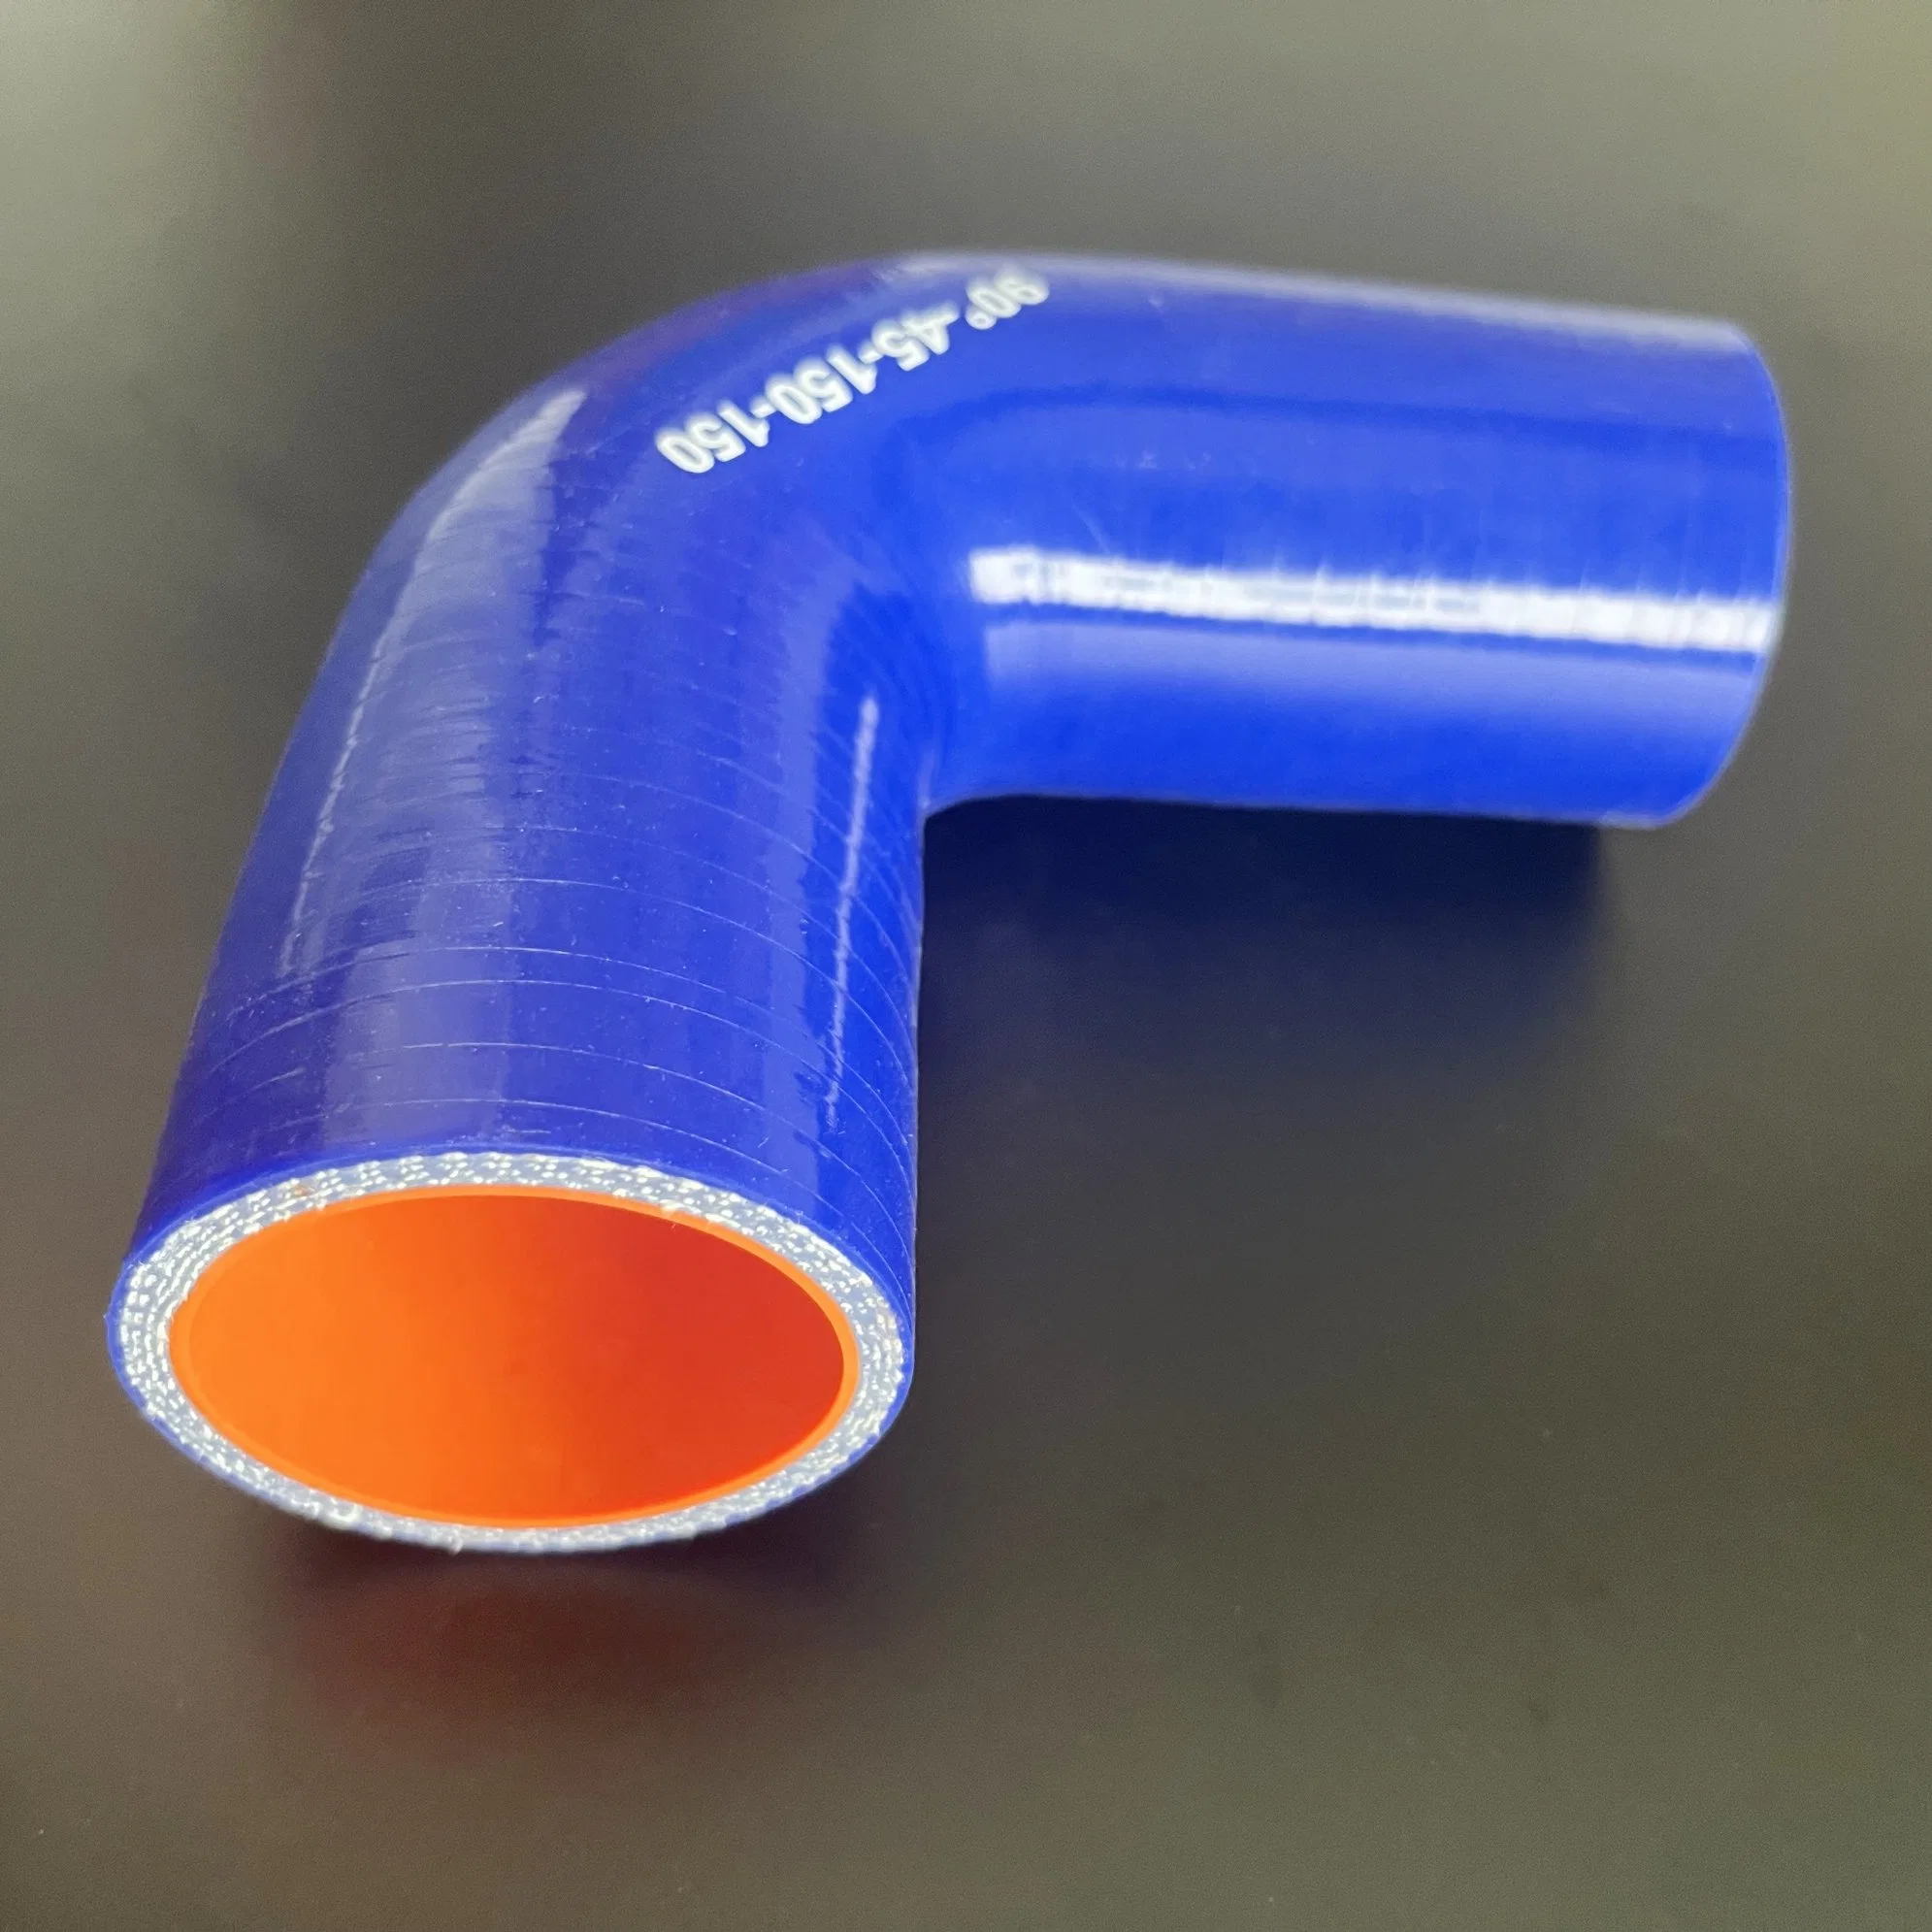 Silicone Braided Tubes Are Used in Car Engines